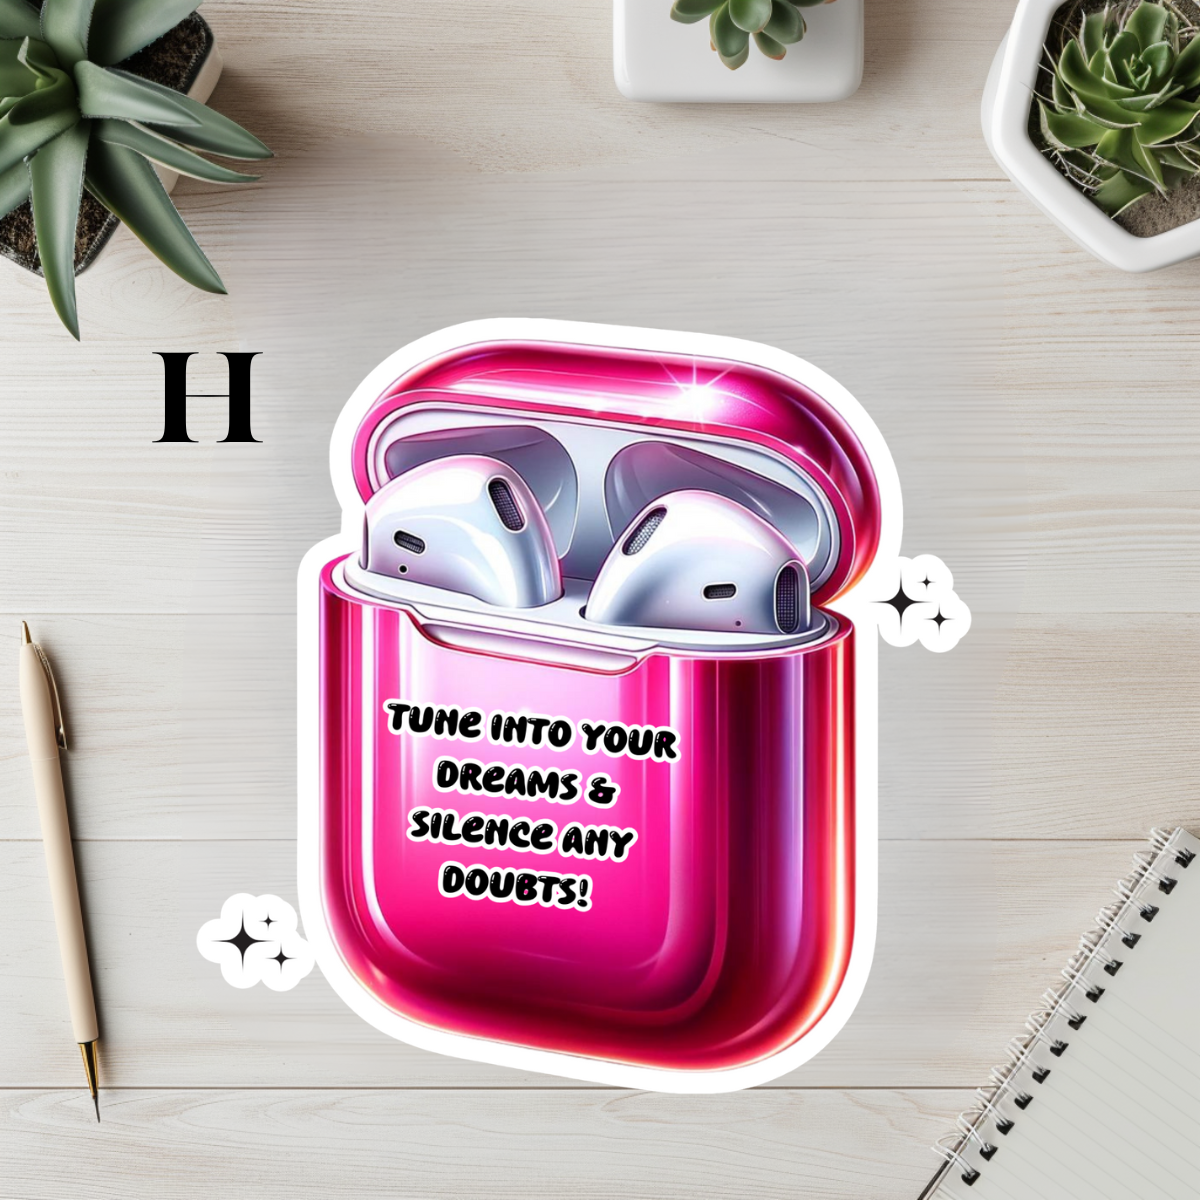 Girly Pink Sticker Pack for the perfect gift for her it's trendy stickers with Inspirational quotes just simply pretty glamorous stickers for everyday Luxury.